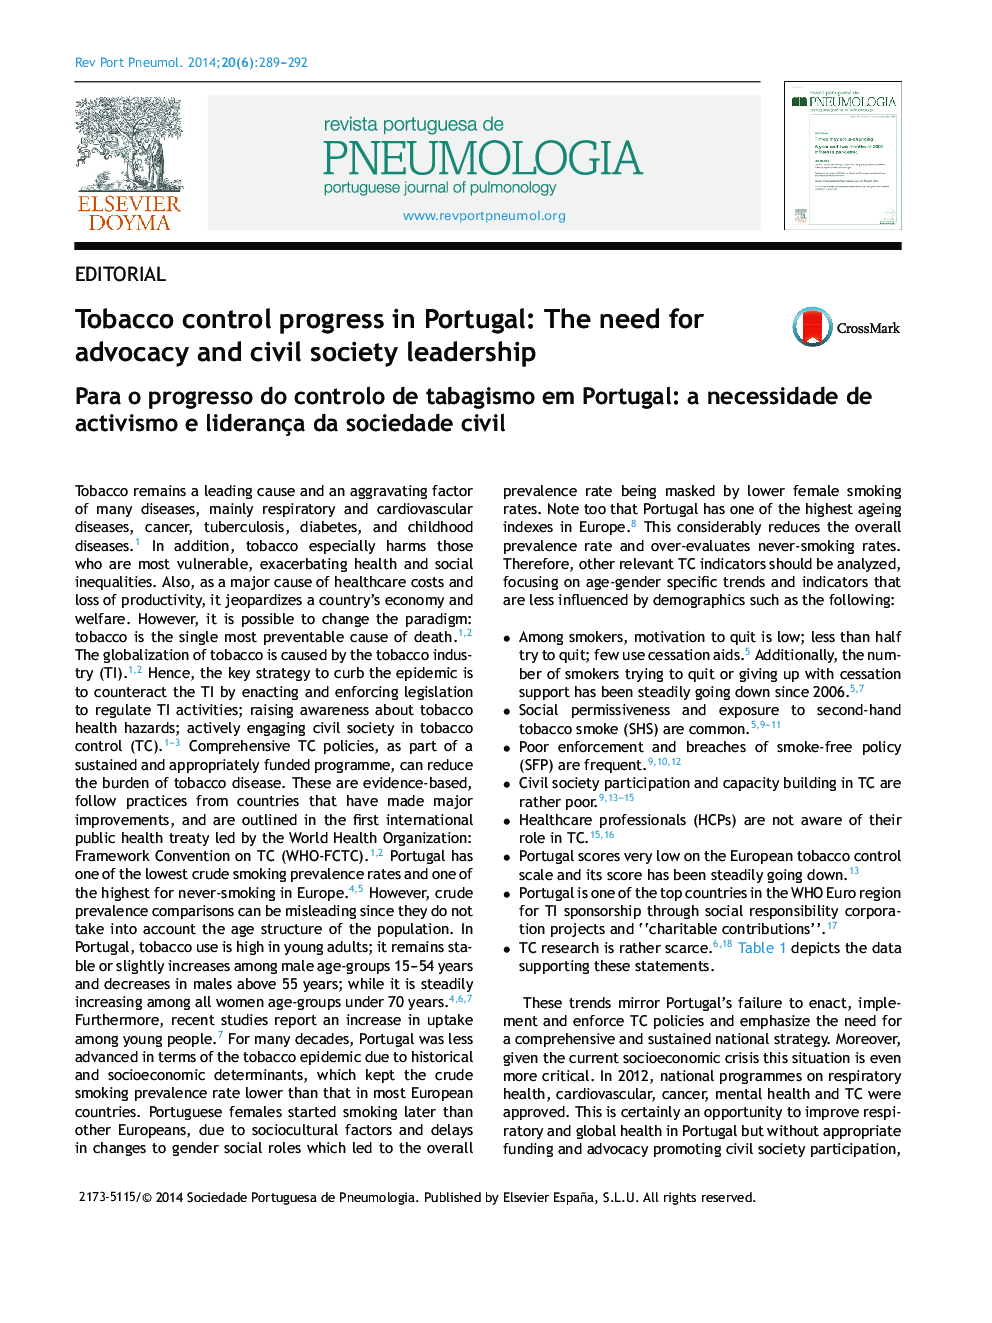 Tobacco control progress in Portugal: The need for advocacy and civil society leadership